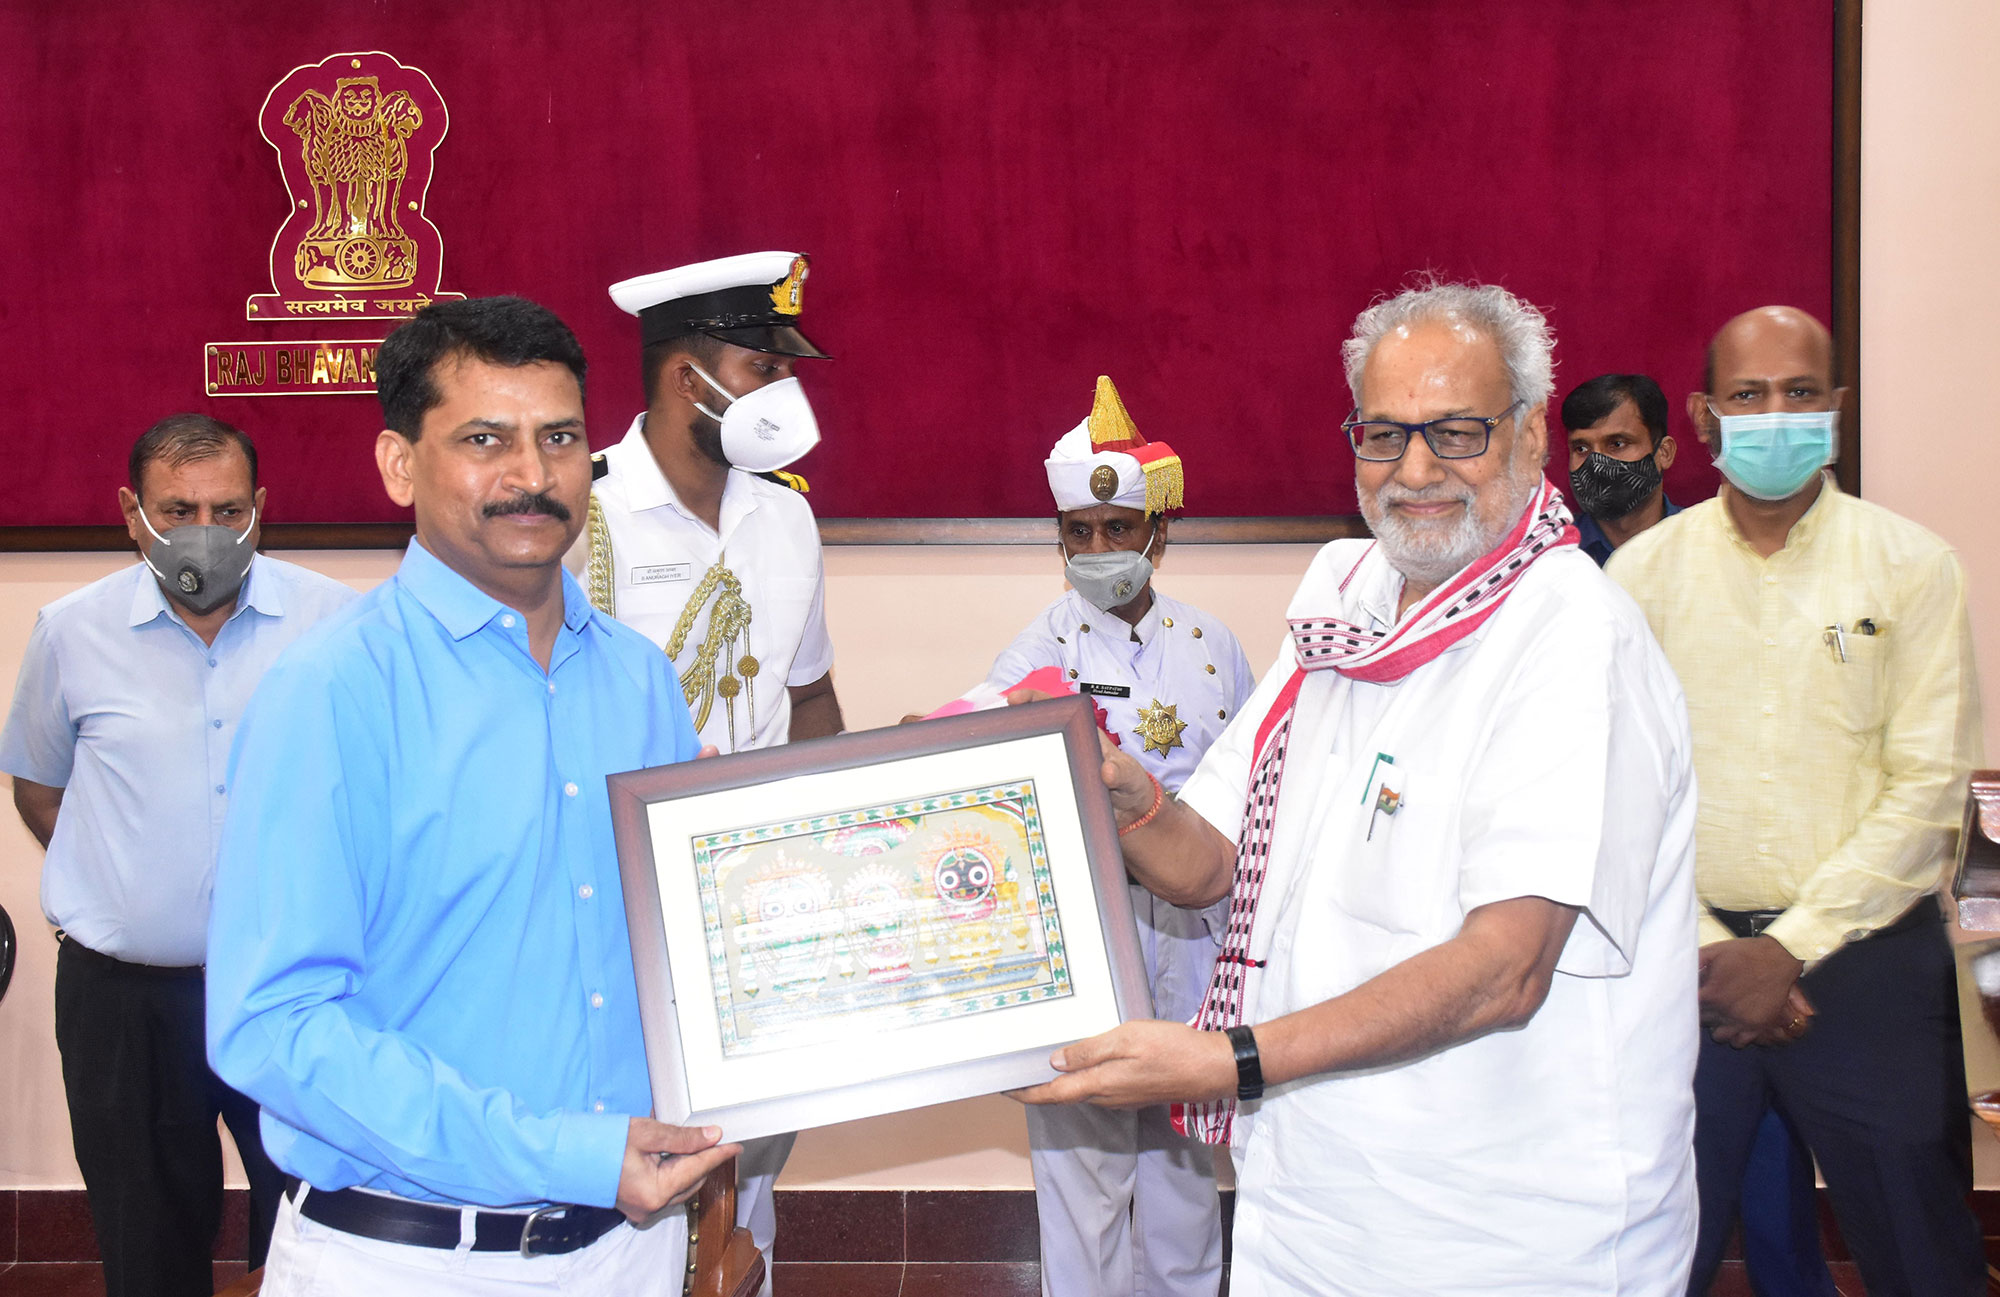 Hon'ble Governor Prof Ganeshi Lal felicitates and presents a memento to outgoing Commissioner-cum-Secretary to Governor Dr Pramod Kumar Meherda at a farewell function in the Abhishek Hall of Raj Bhavan on 02.09.2021